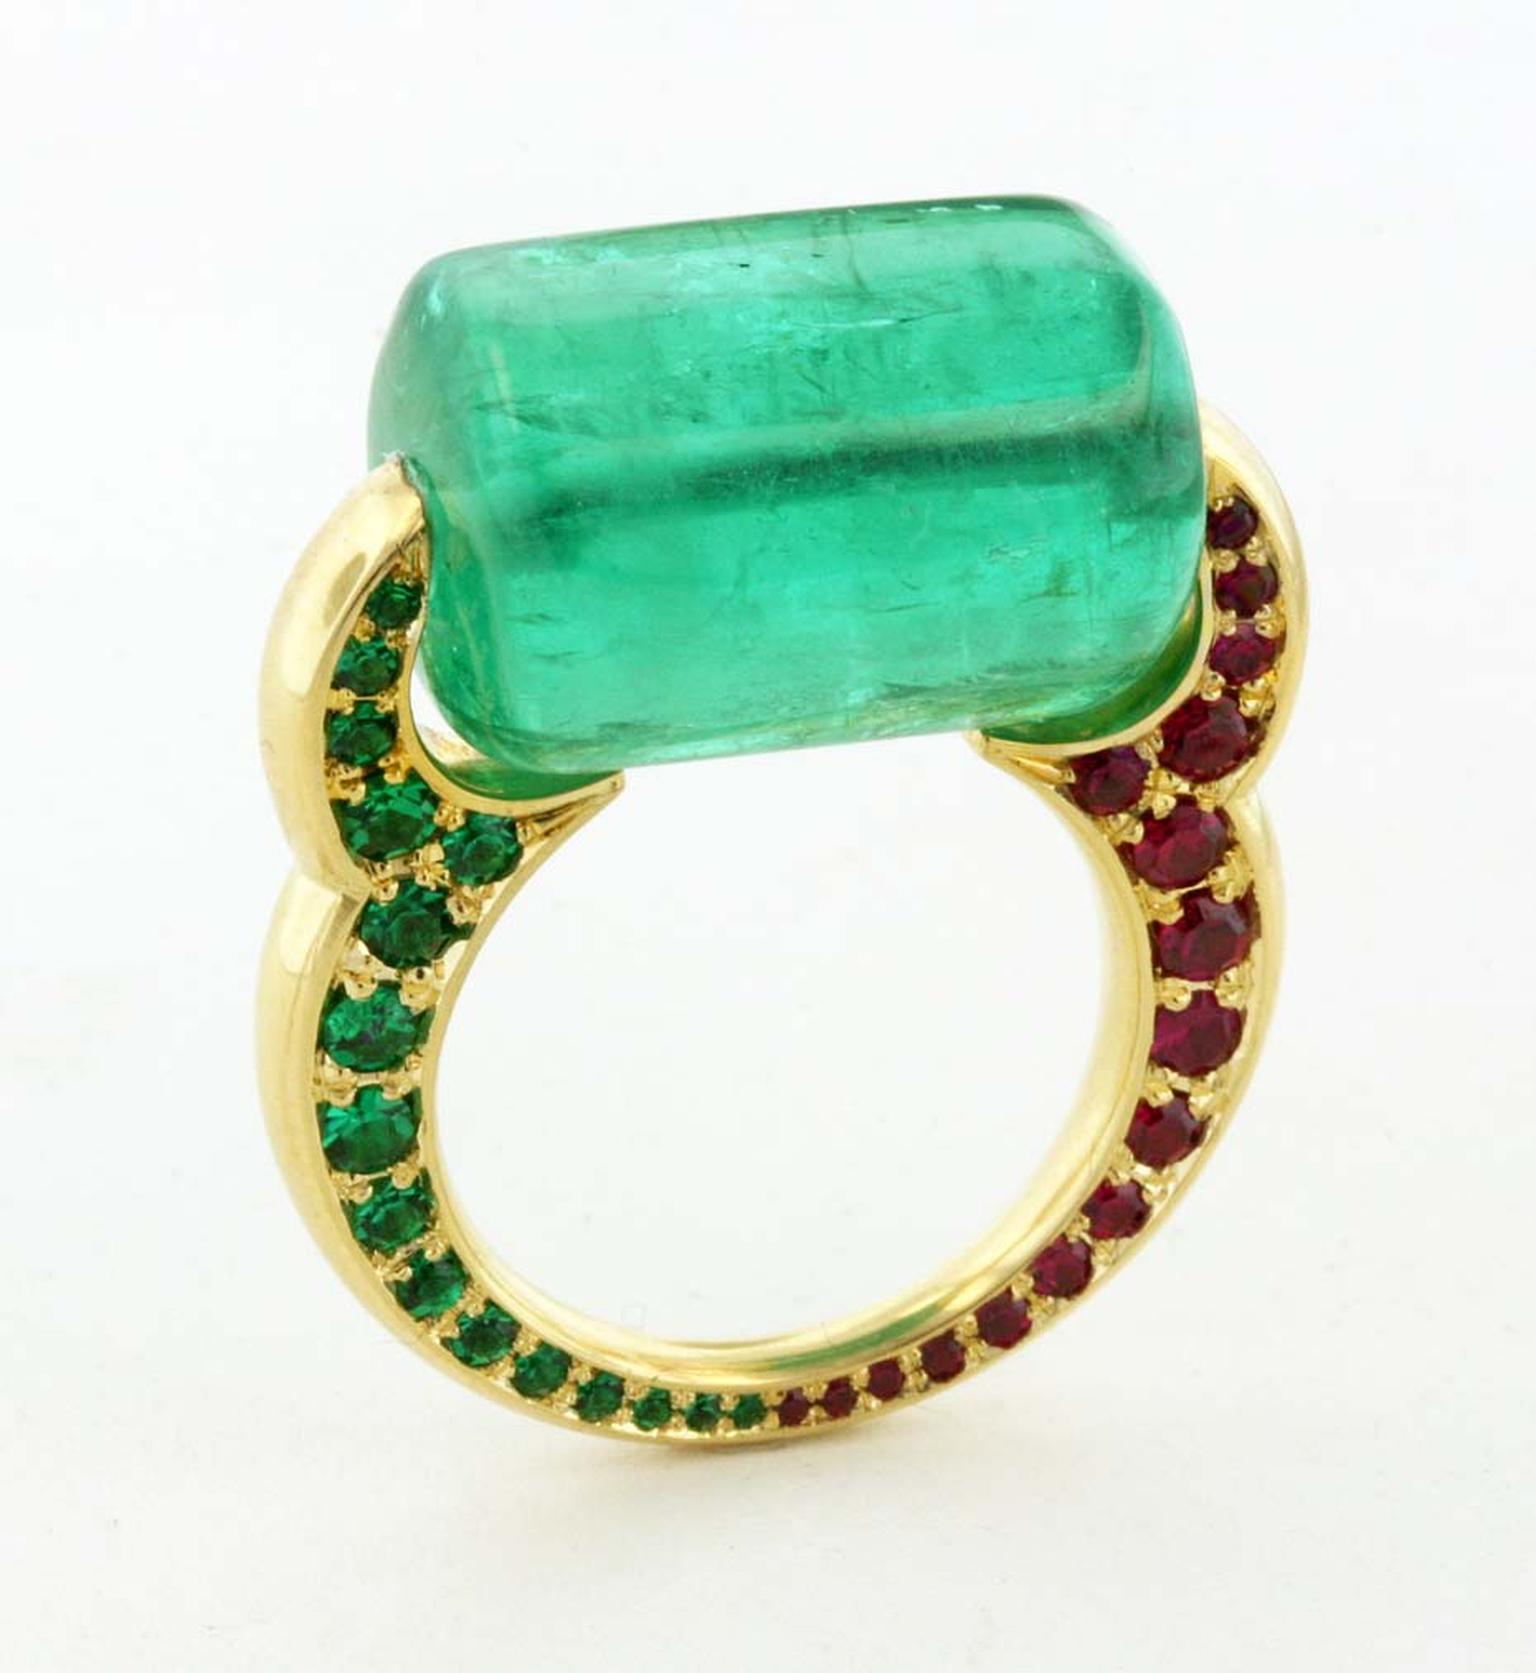 James de Givenchy Taffin Passage to India ring centers on a bold emerald bead, which is set in an Eastern-inspired gold shank of emeralds and rubies.